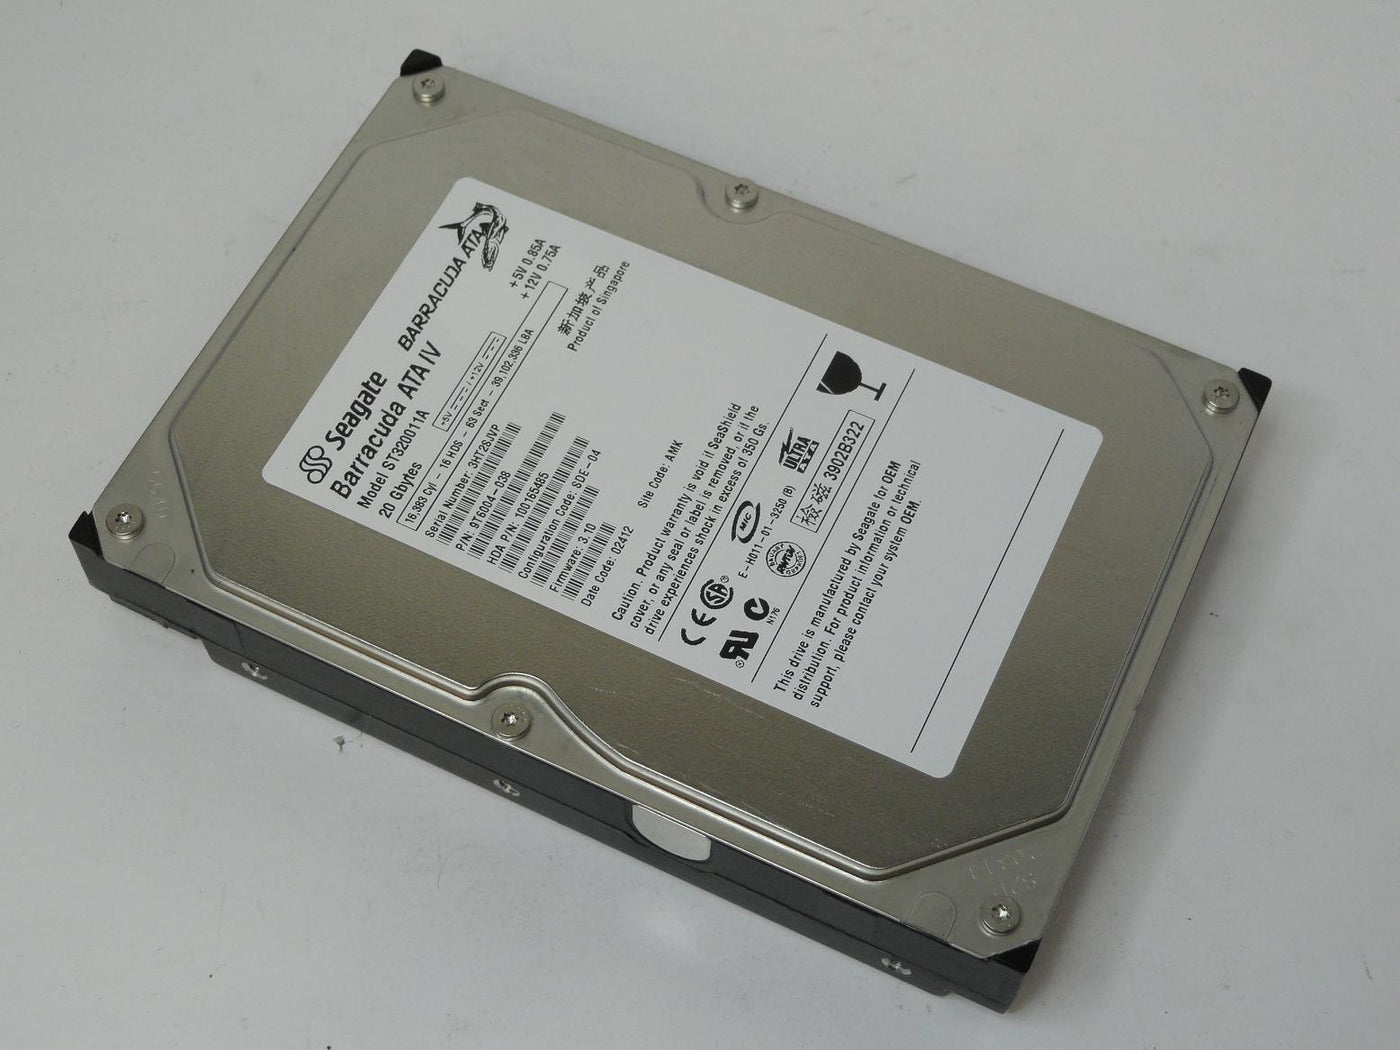 9T6004-038 - Seagate 20GB IDE 7200rpm 3.5in HDD - USED